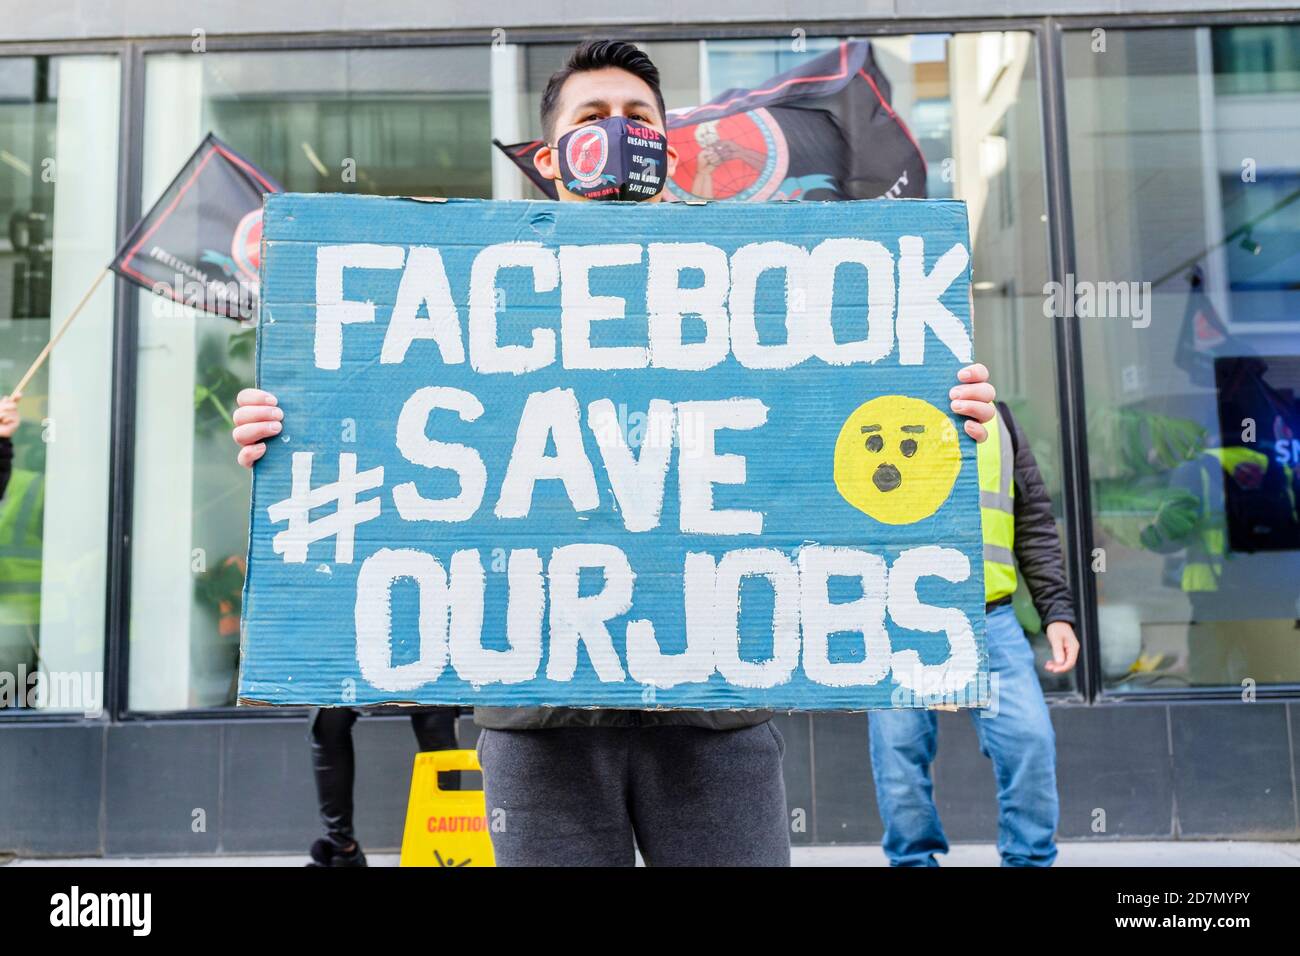 23 October 2020, London. UK. Agency cleaning staff employed at the offices of Facebook demonstrate against proposed redundancies and cuts in working hours while complying with social distancing regulations. Stock Photo